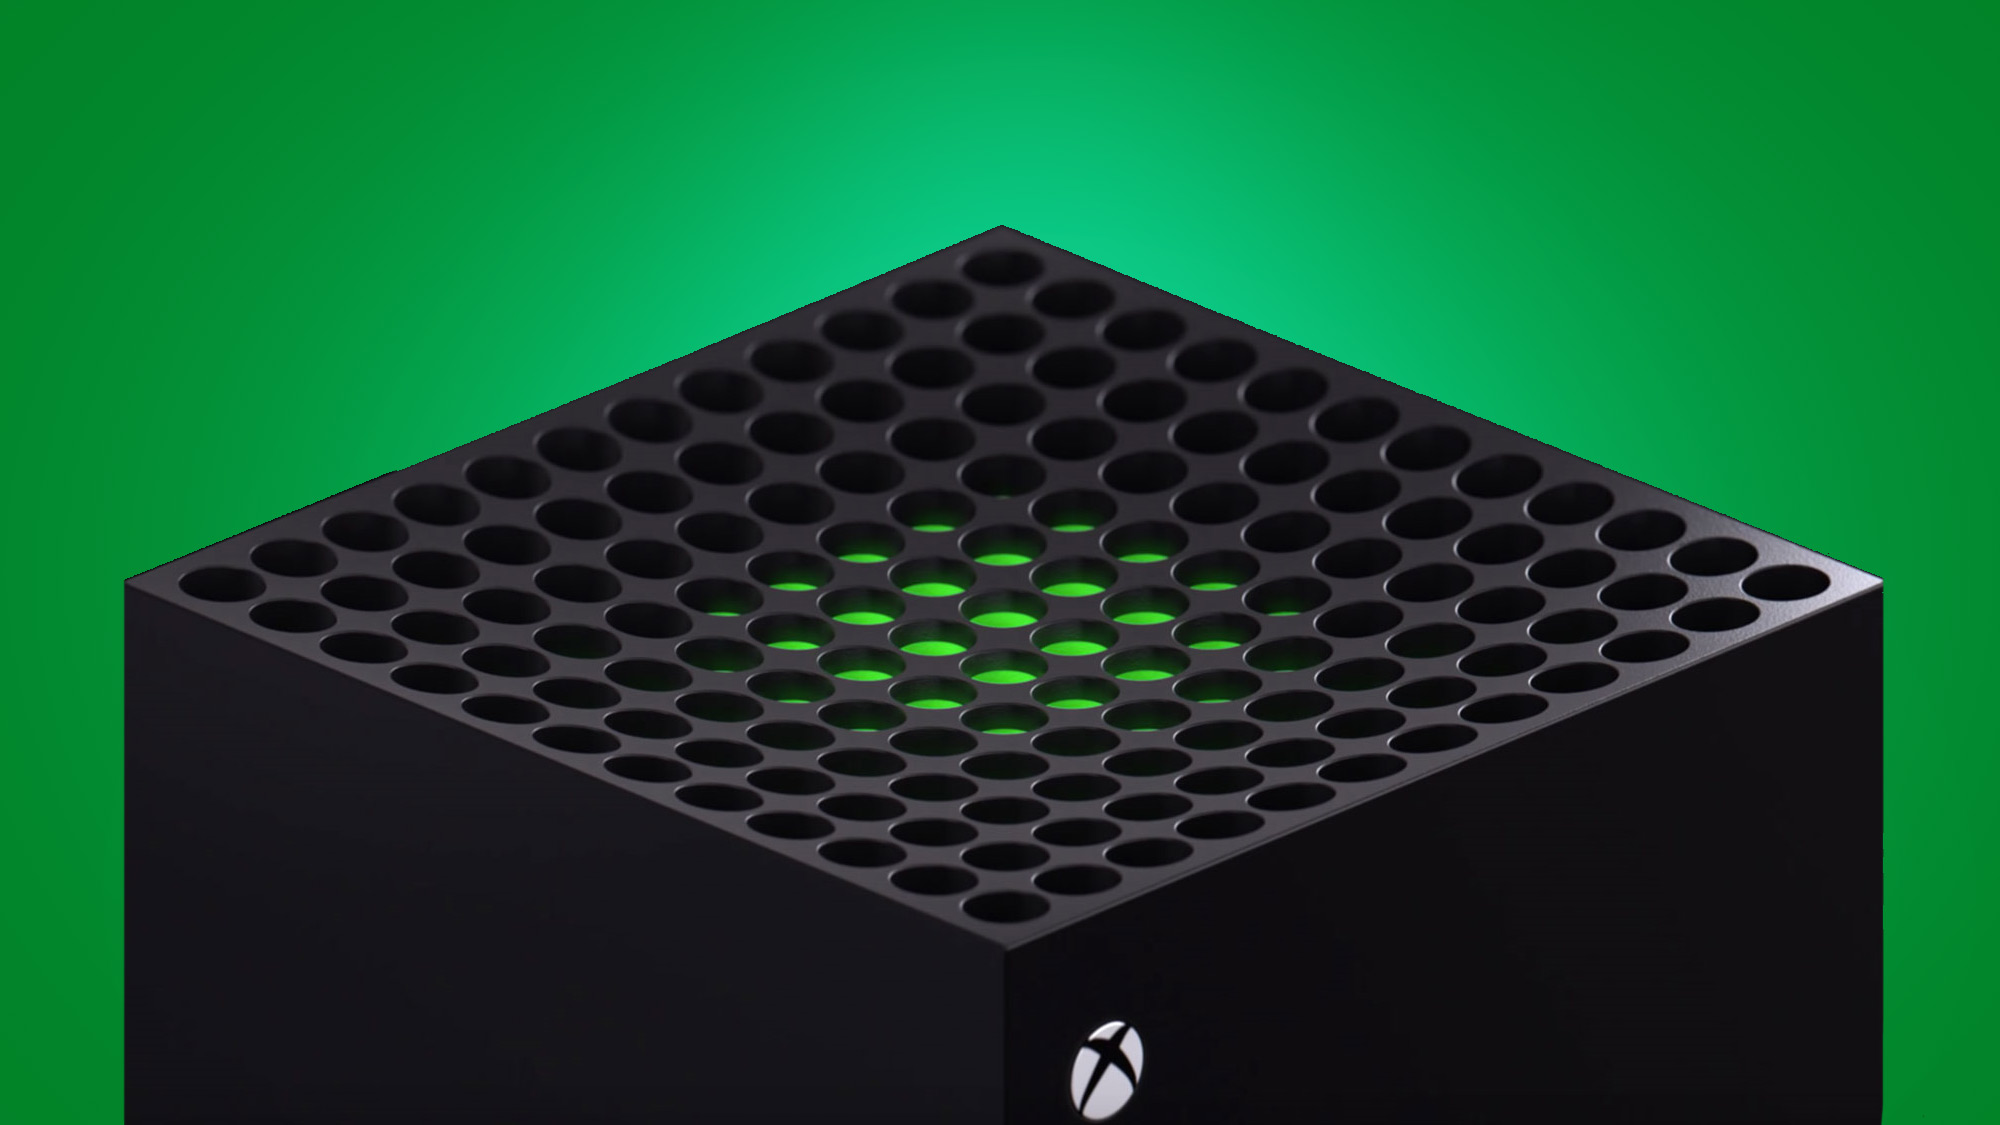 what is the price for the new xbox